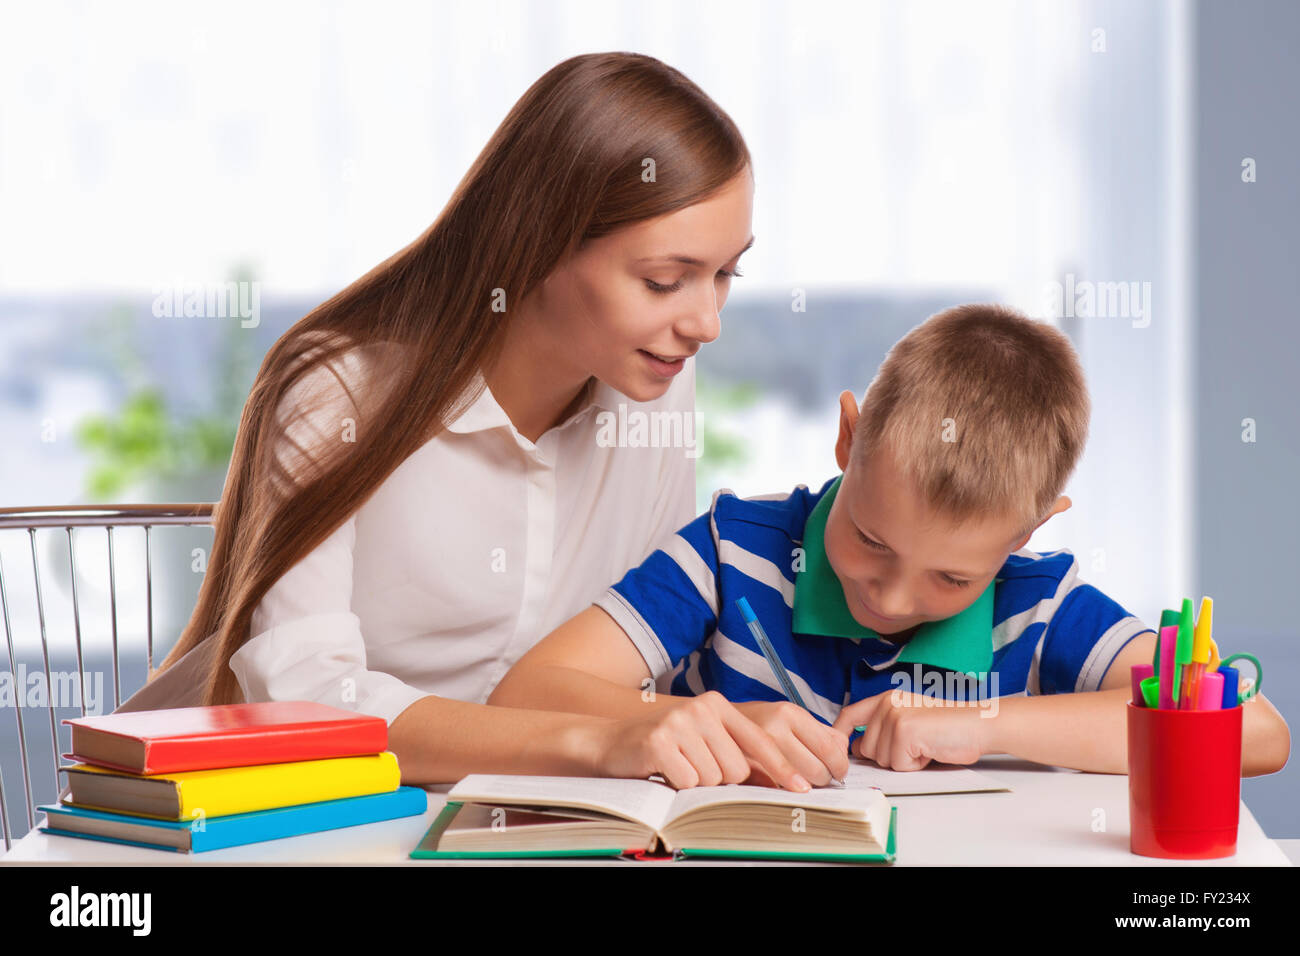 Mother helping son with Homework at table Banque D'Images